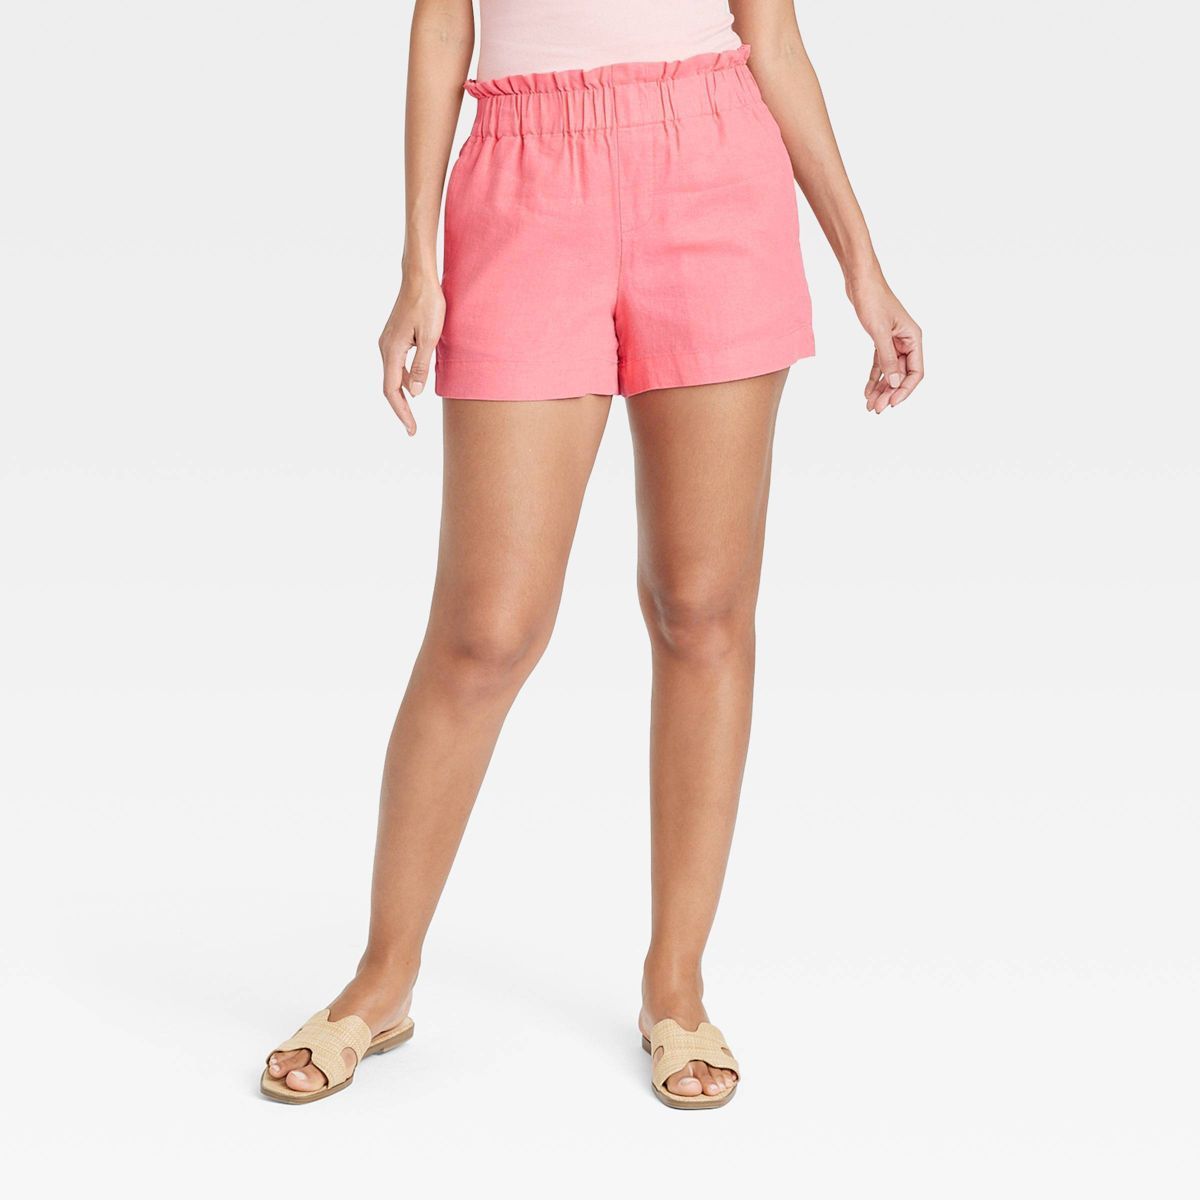 Women's High-Rise Linen Pull-On Shorts - A New Day™ Pink S | Target